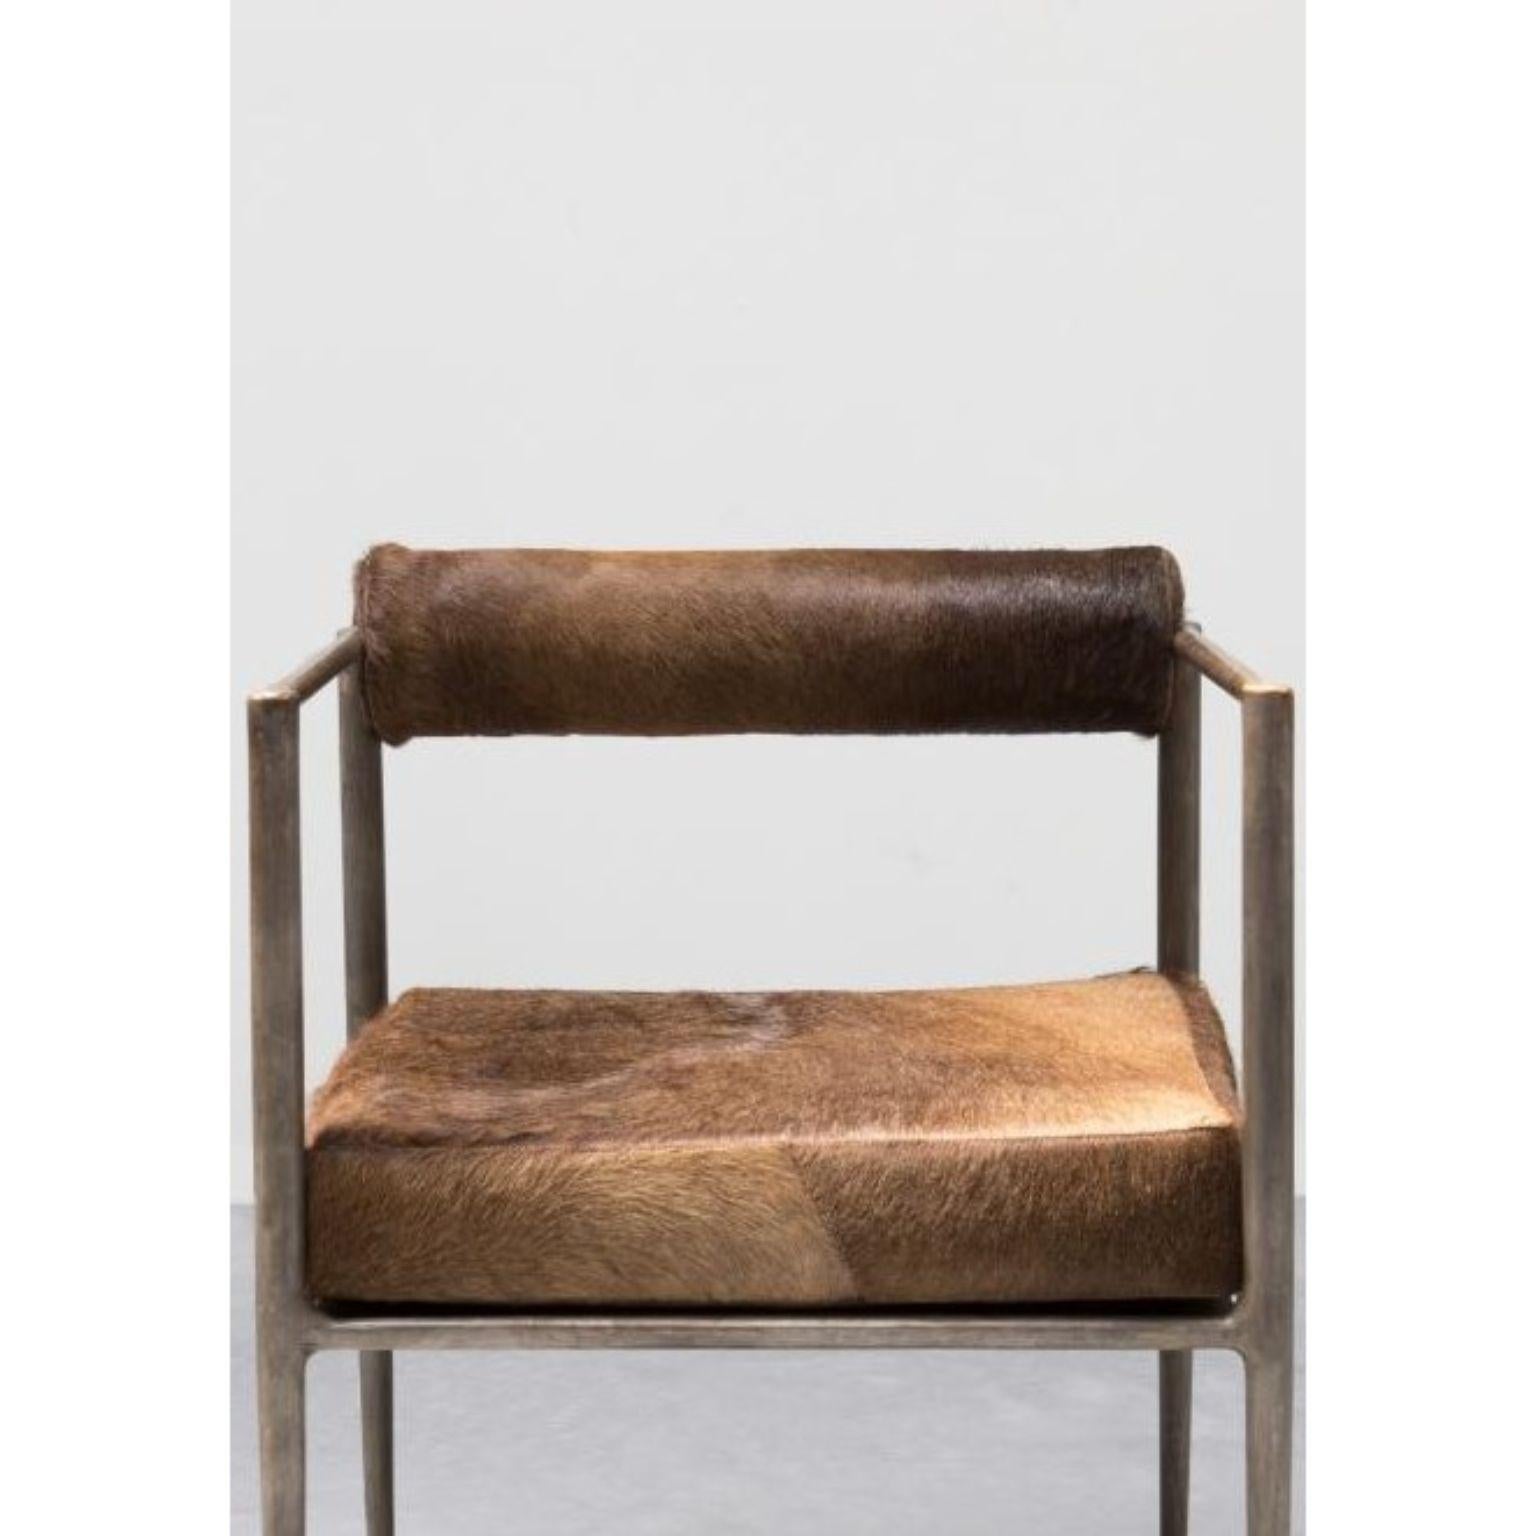 Square Alchemy chair by Rick Owens
2015
Dimensions: L 60 x W 60 x H 76 cm
Materials: Bronze, camel skin
Weight: 40 kg

Rick Owens is a California-born fashion and furniture has developed a unique style that he describes as “luxe minimalism.”
Though